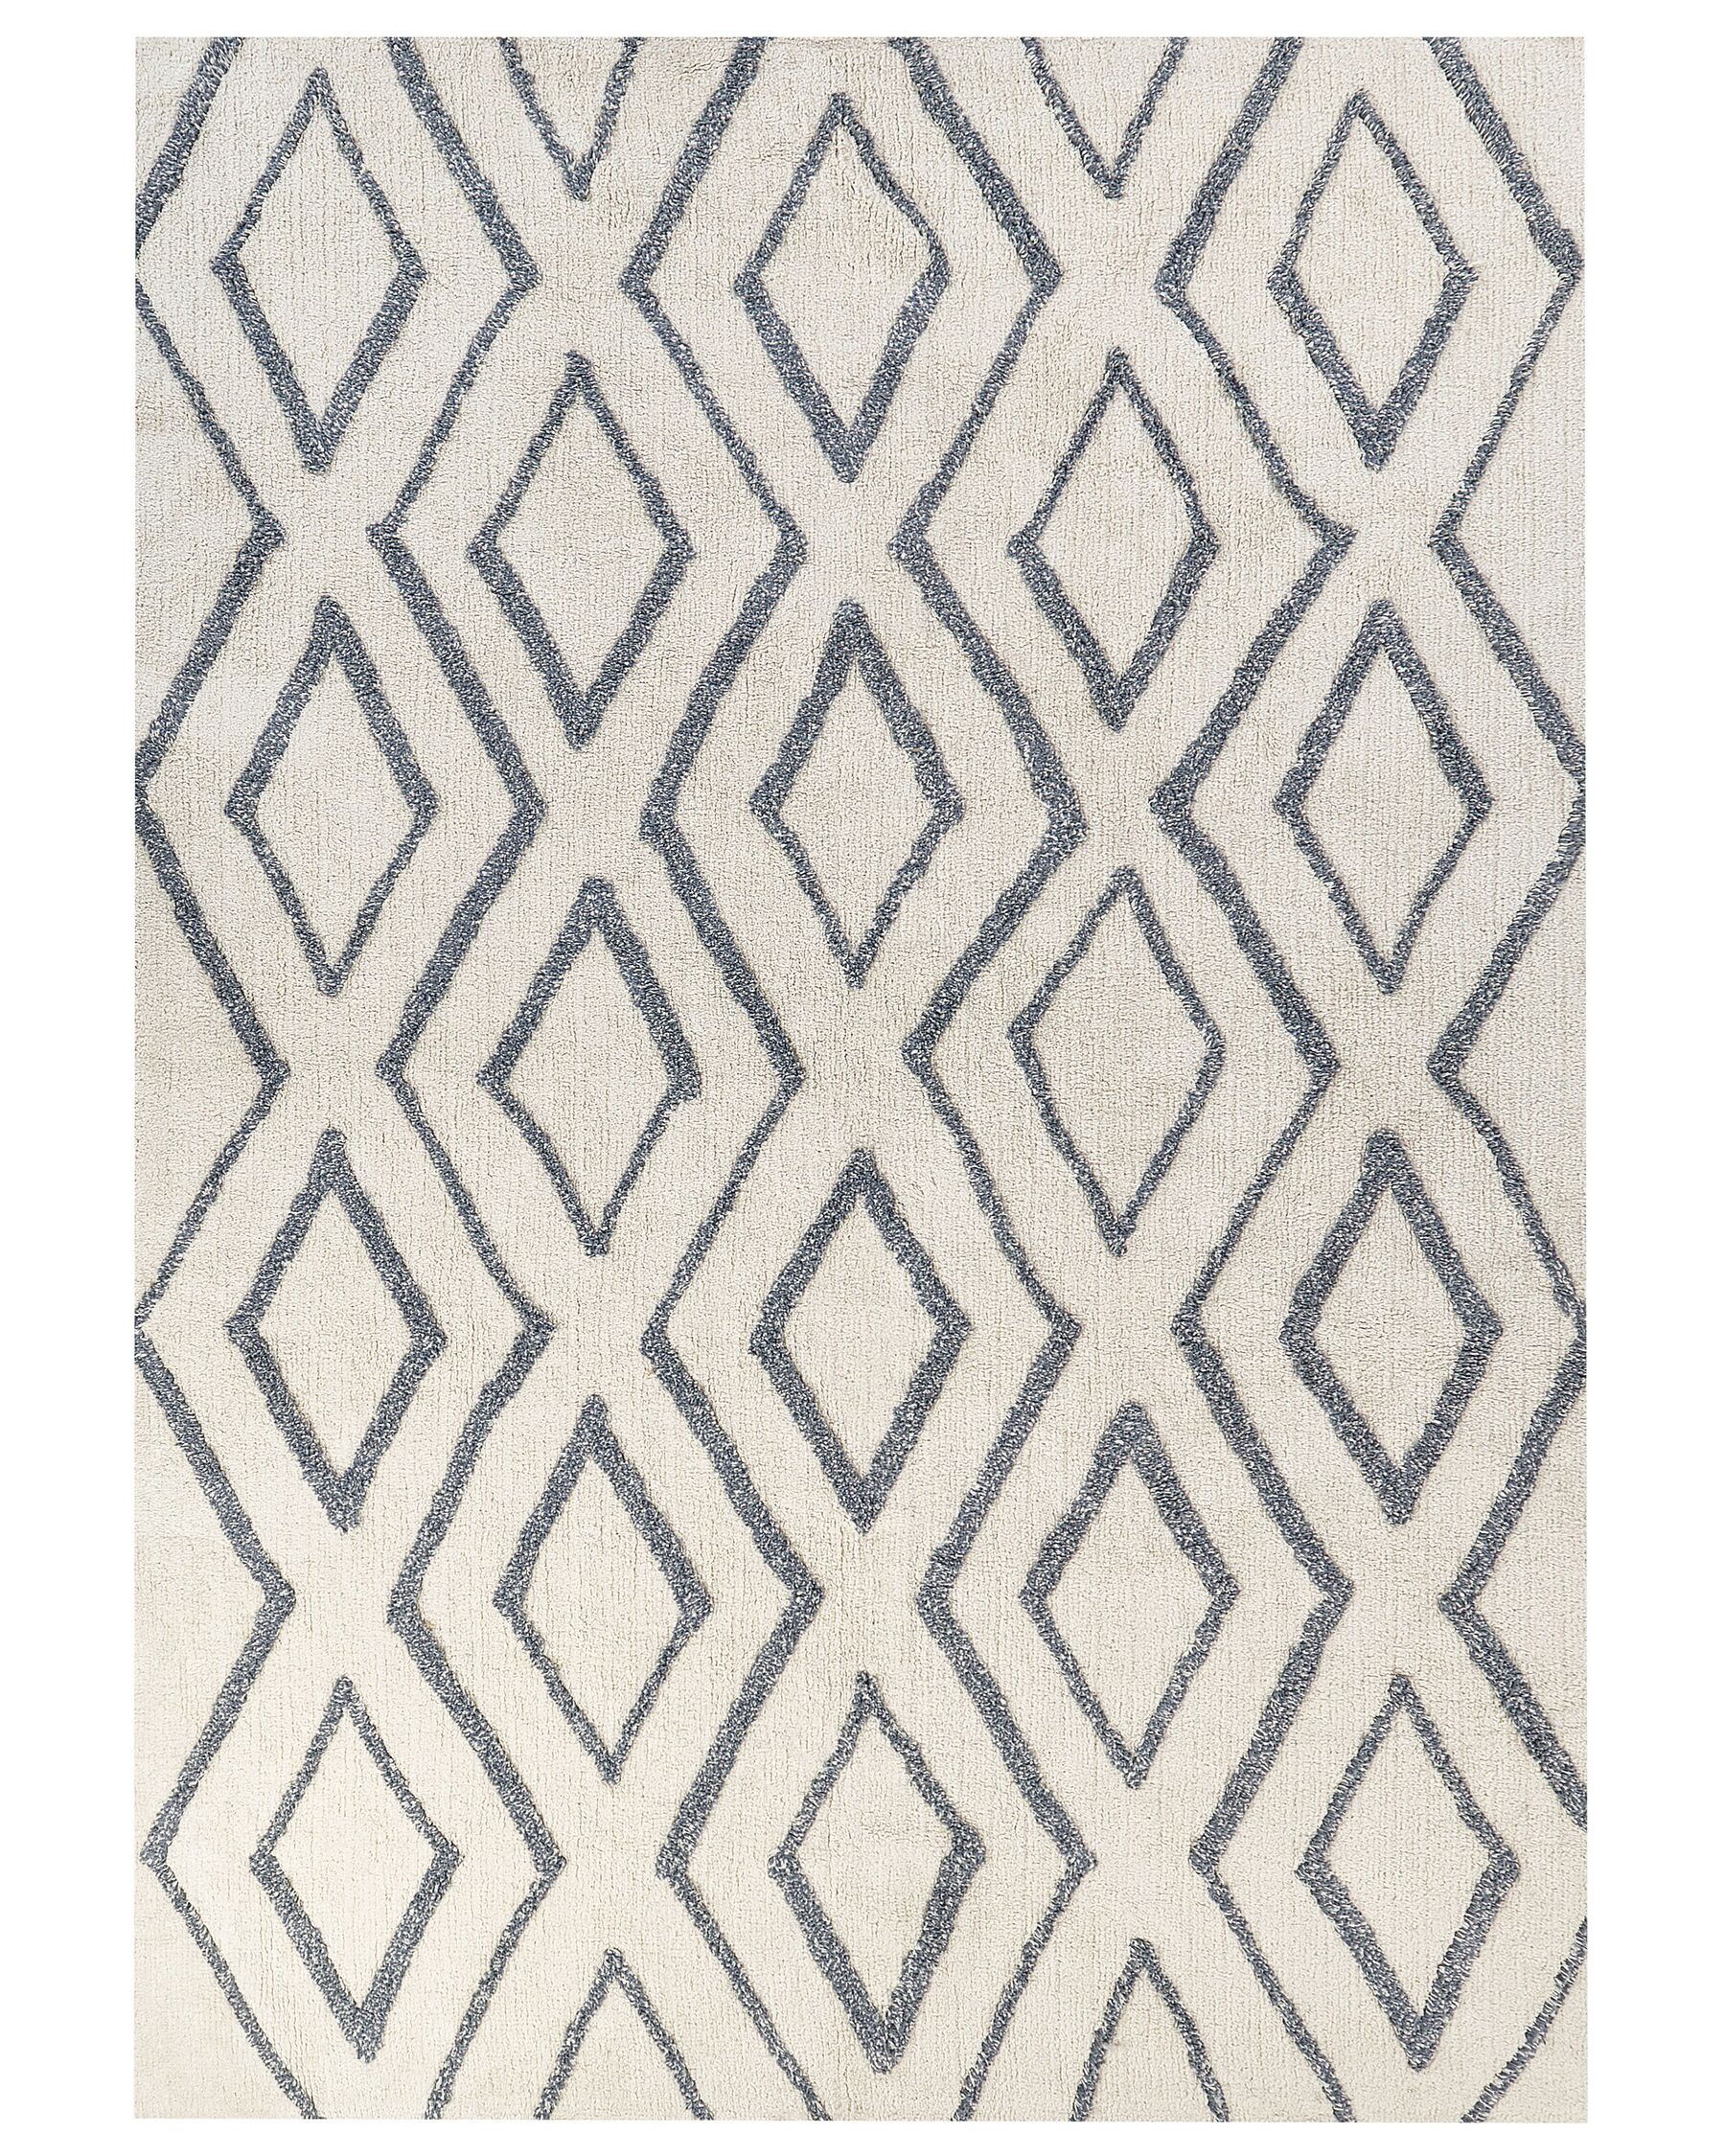 Shaggy Cotton Area Rug 160 x 230 cm Off-White and Blue MENDERES_842969